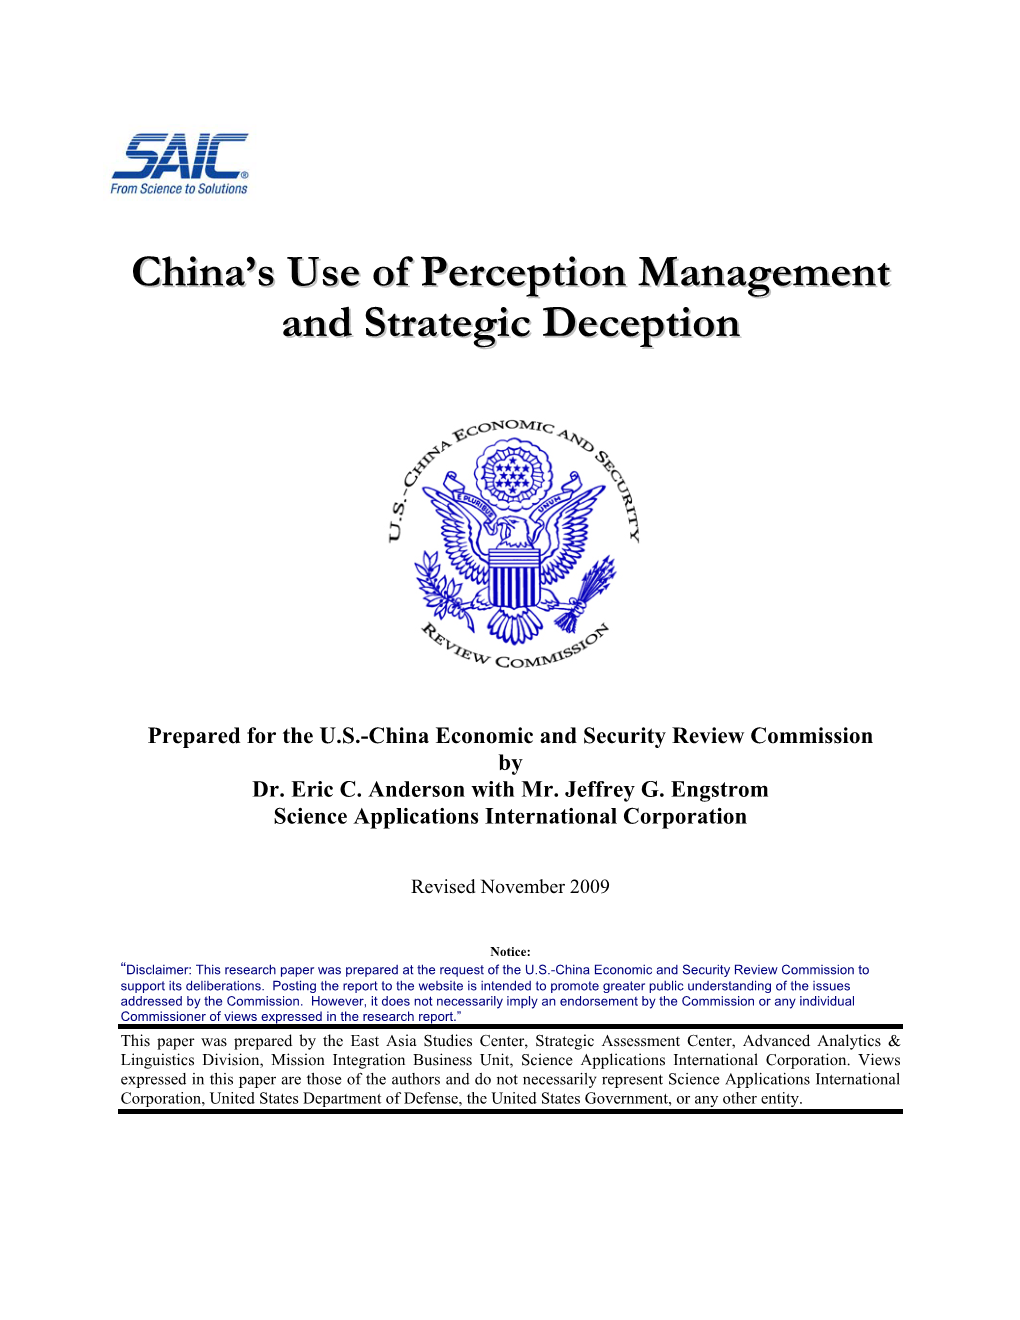 China's Use of Perception Management and Strategic Deception